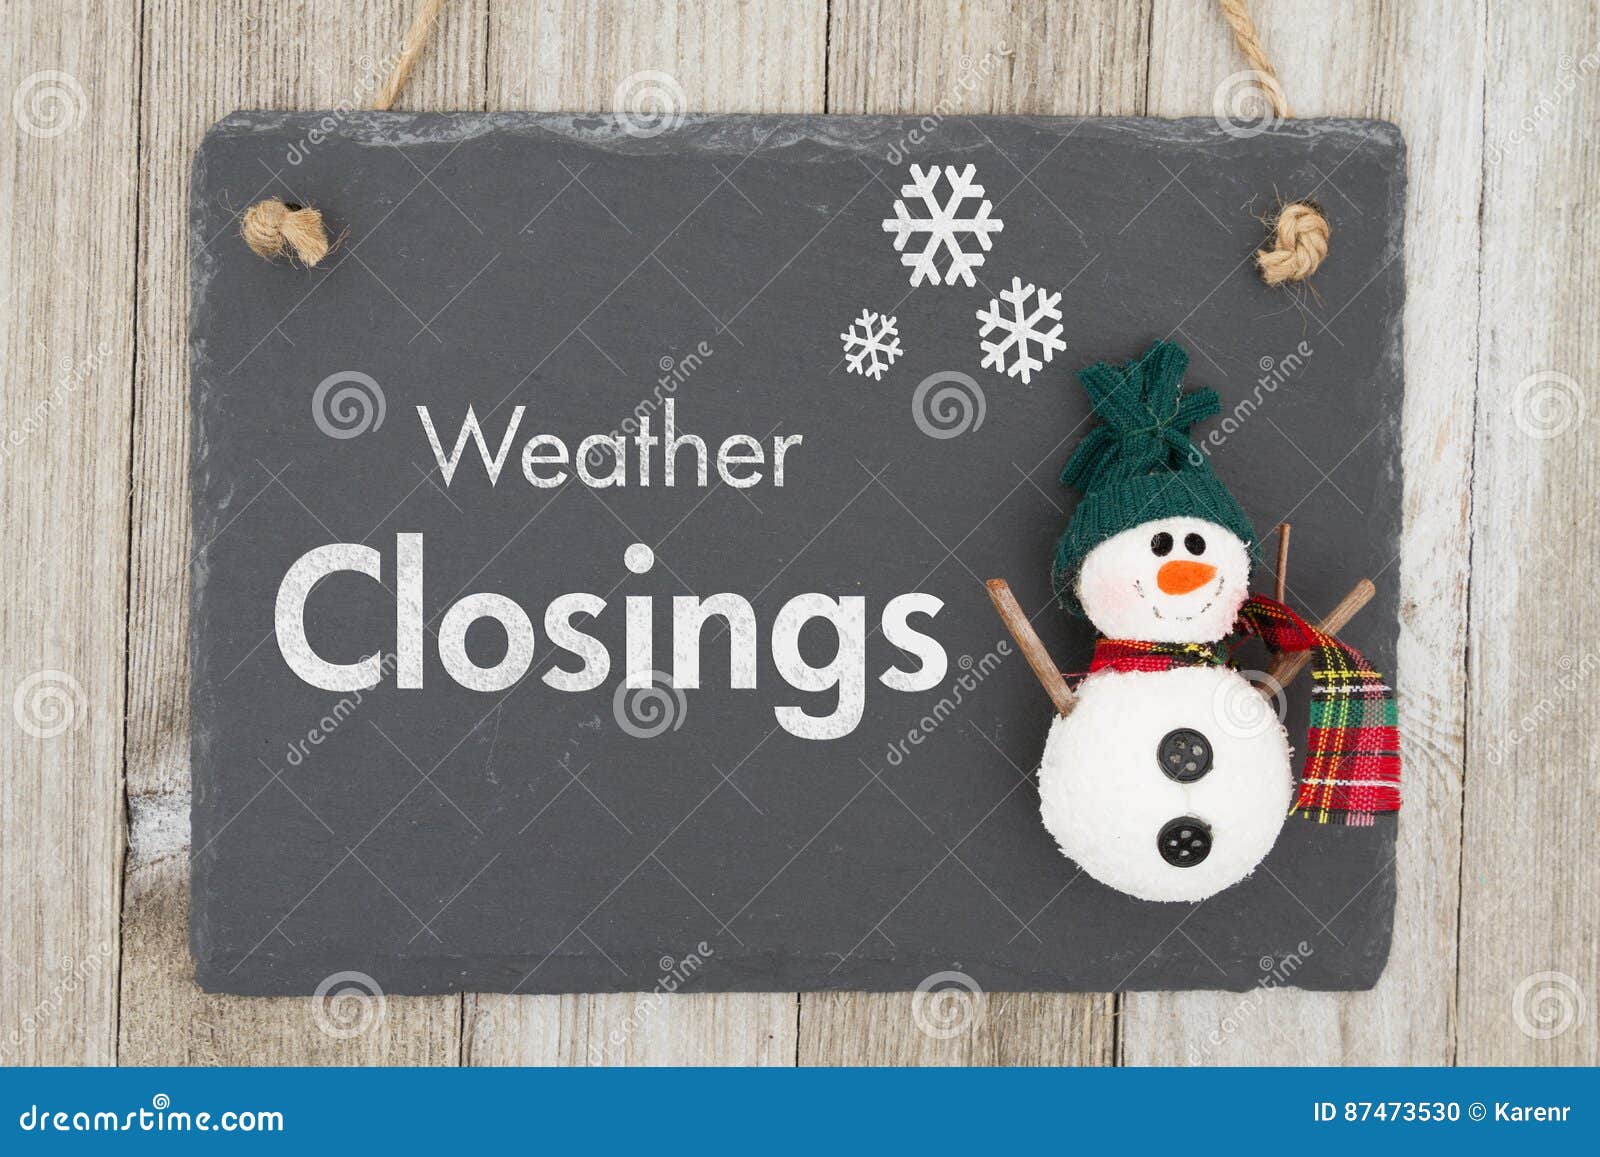 weather closing sign